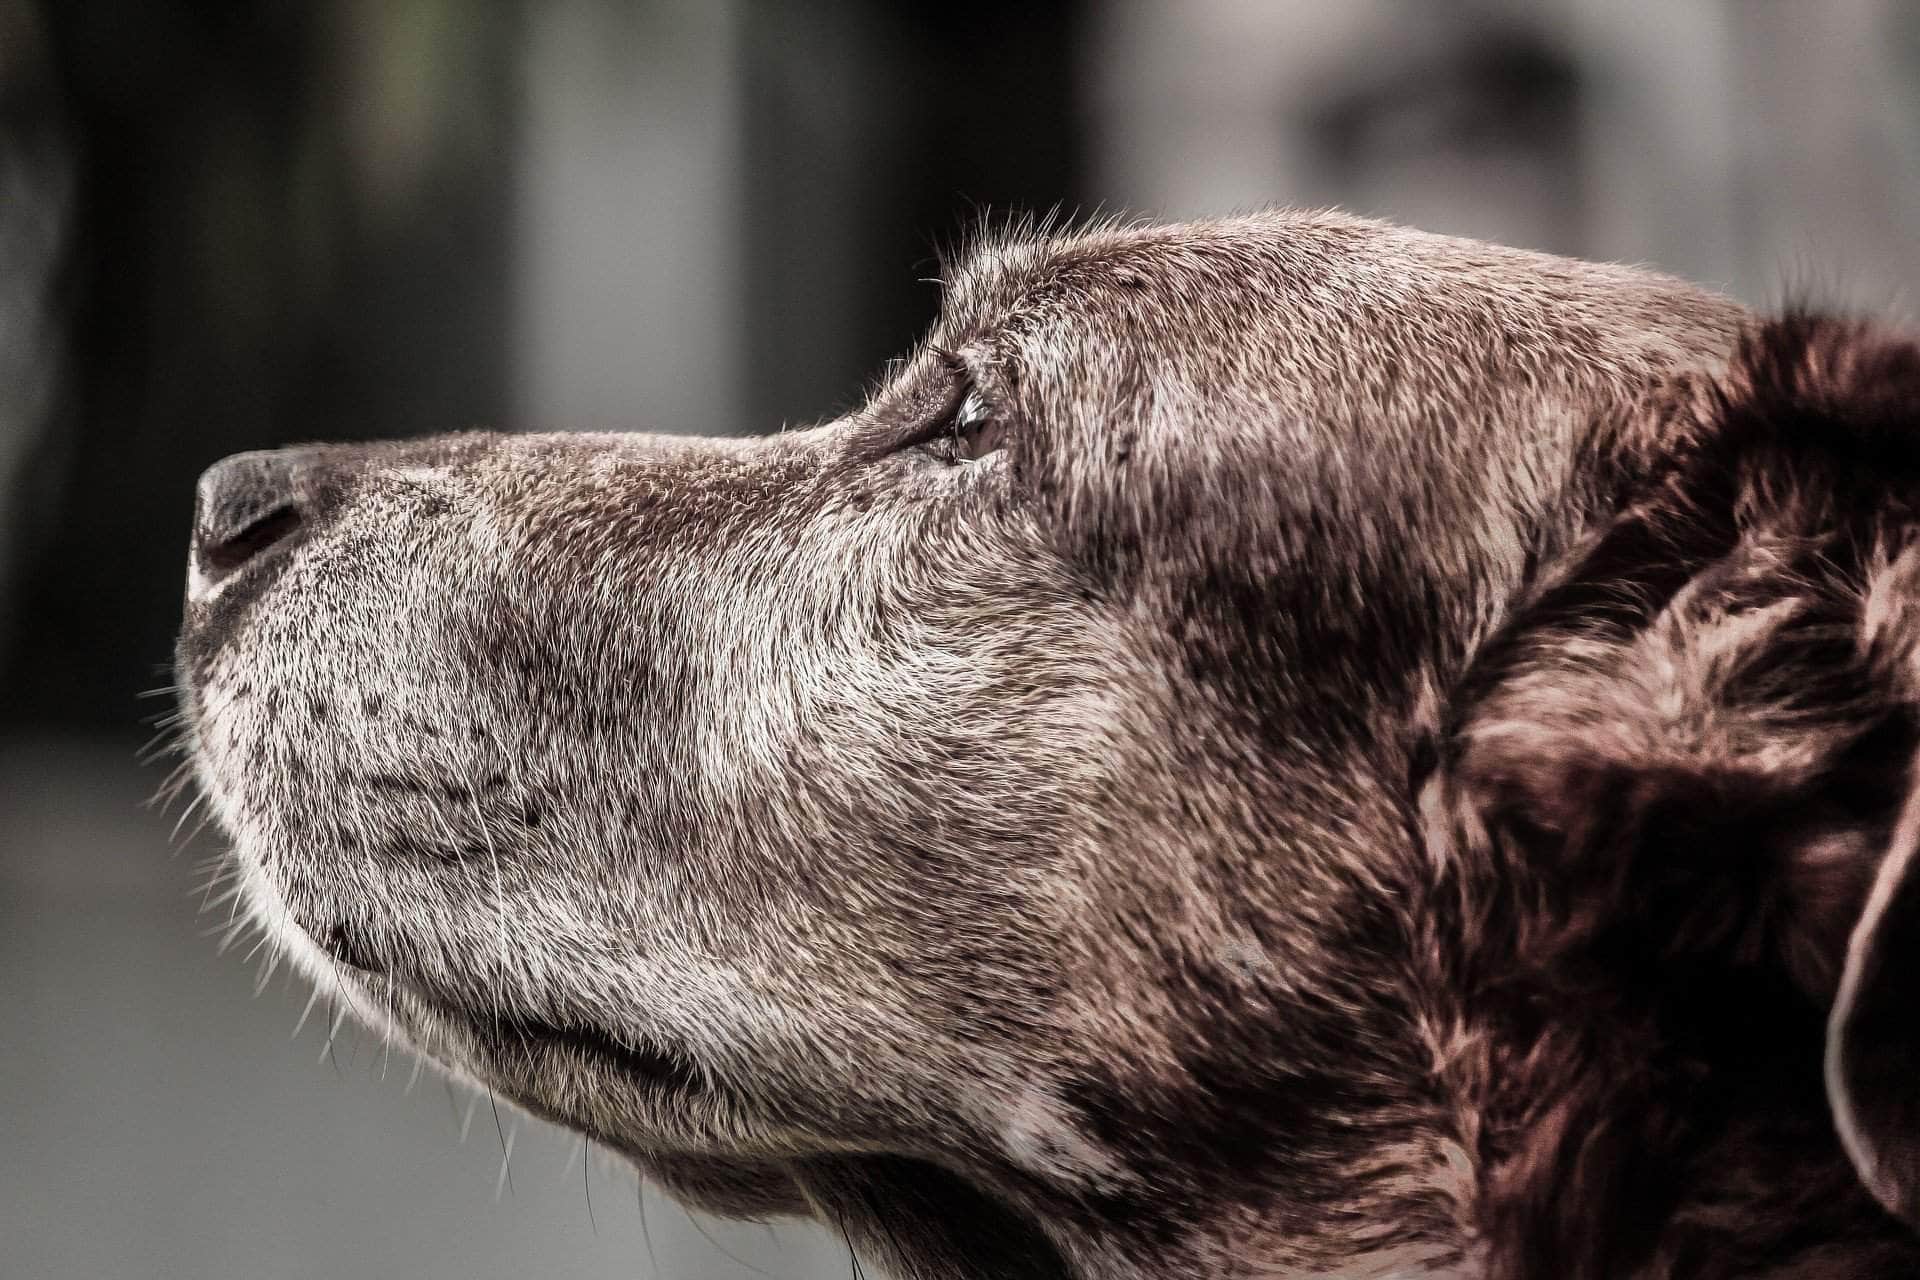 GREY FACES...WHEN IS YOUR DOG A SENIOR?